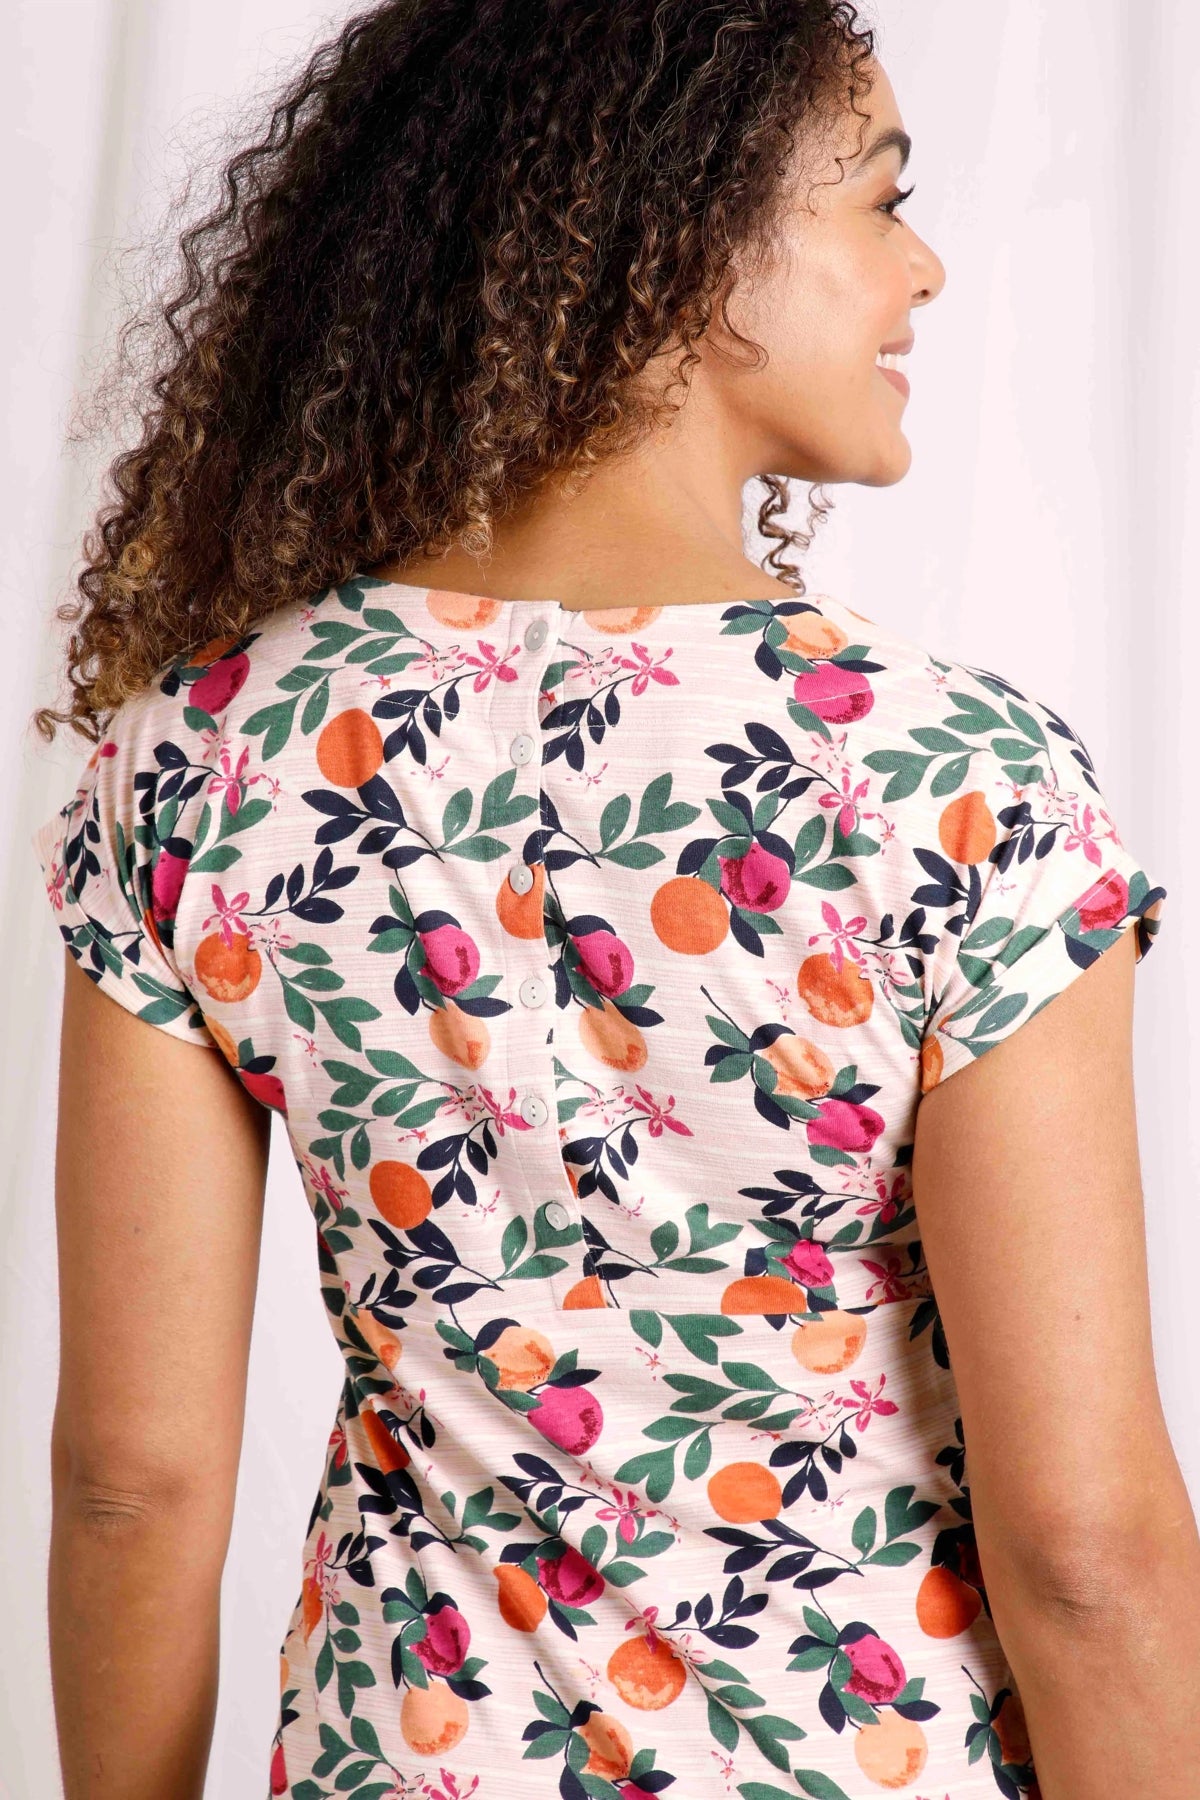 Weird Fish women's Tallhassee ccotton jersey dress in a Cantaloupe fruit pattern with buttons down the back.